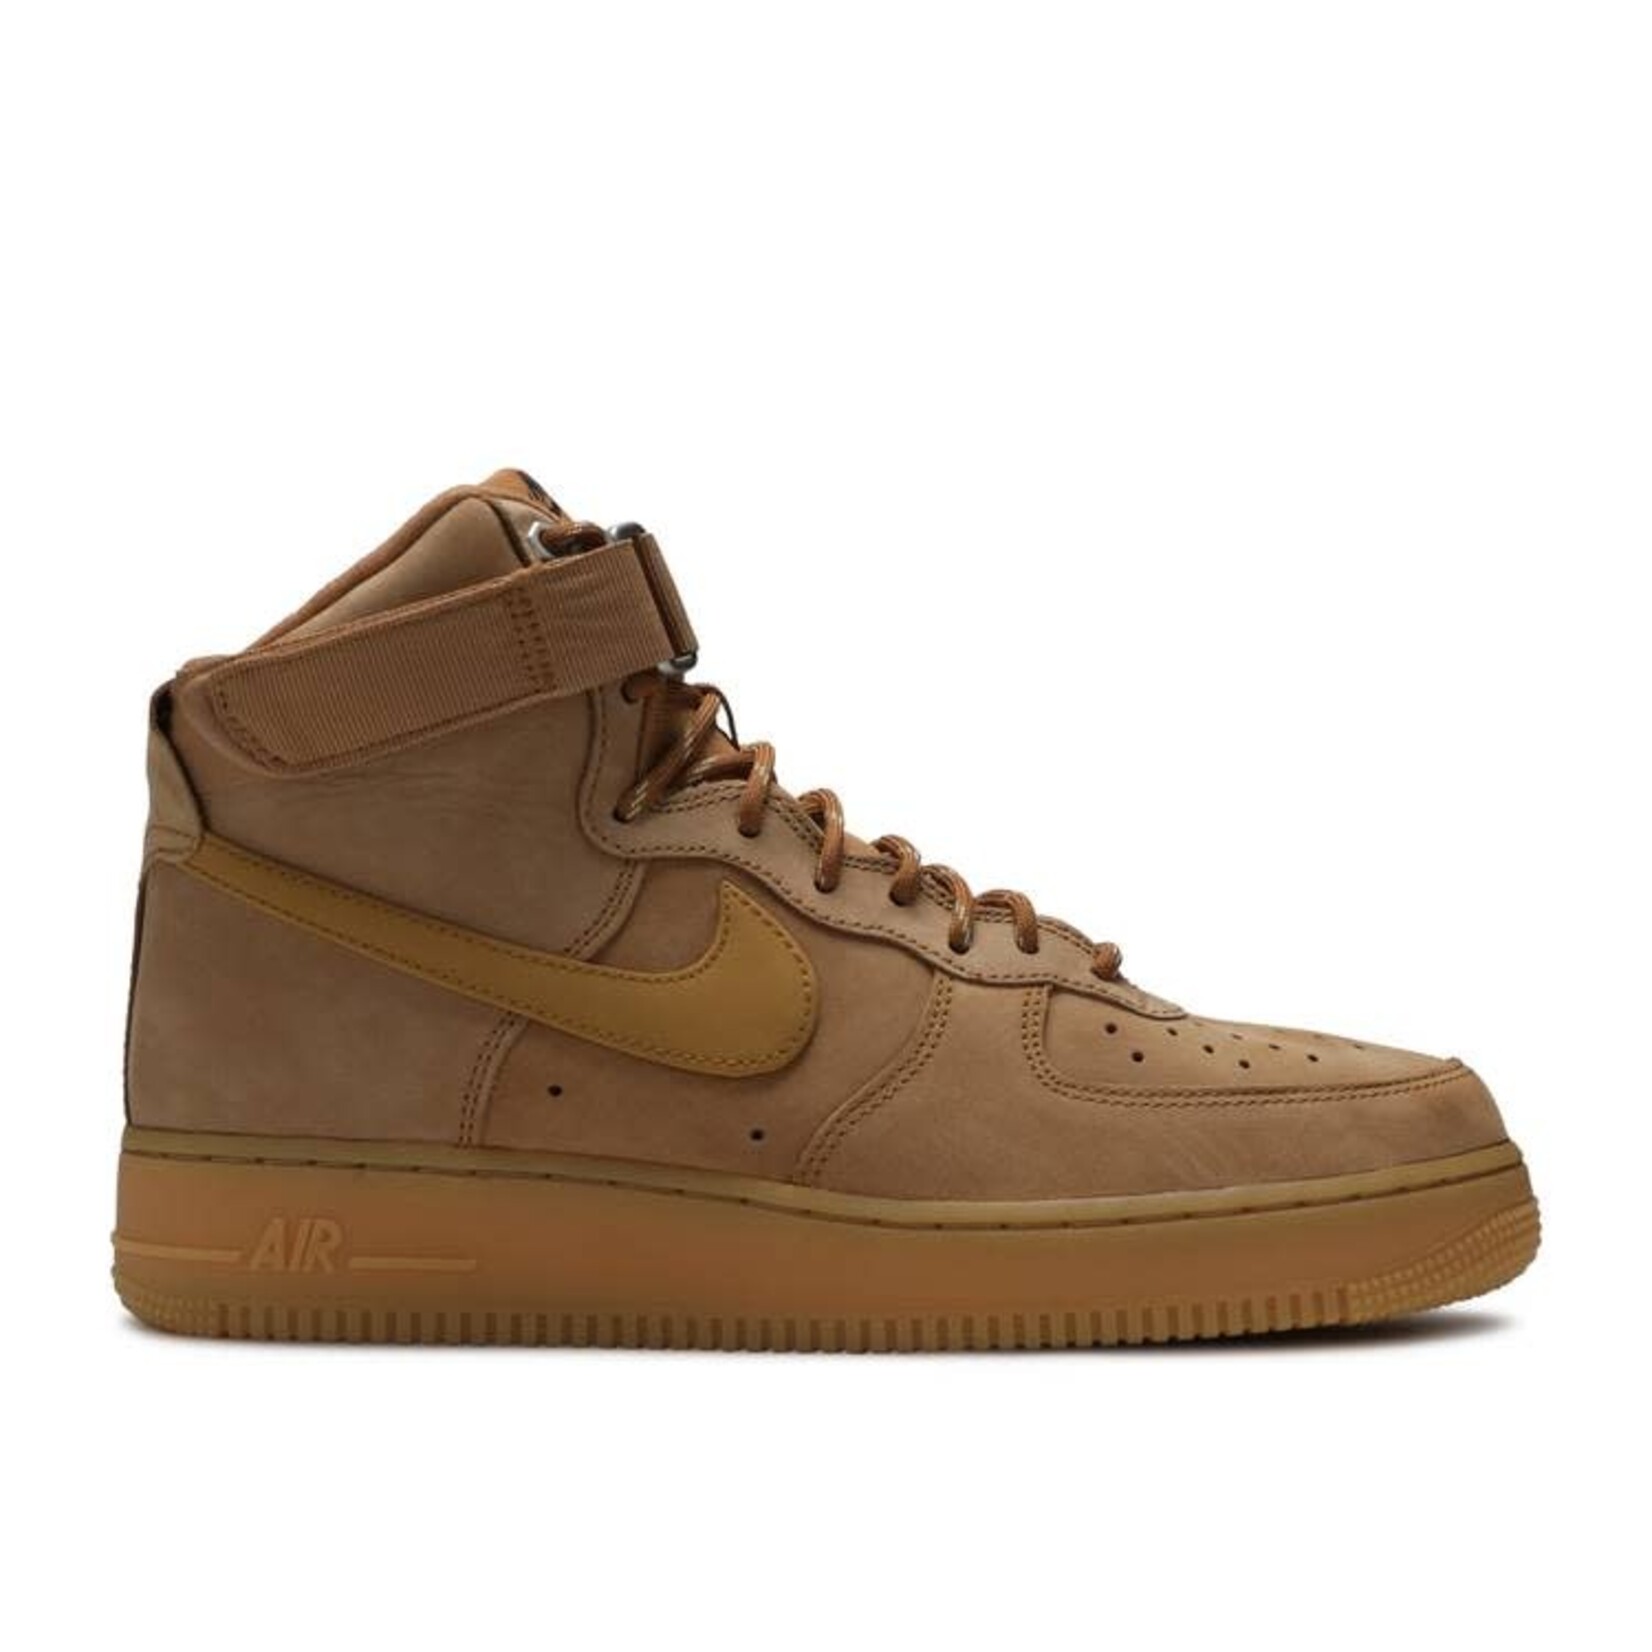 Nike Nike Air Force 1 High Flax (2018) Size 8.5, DS BRAND NEW